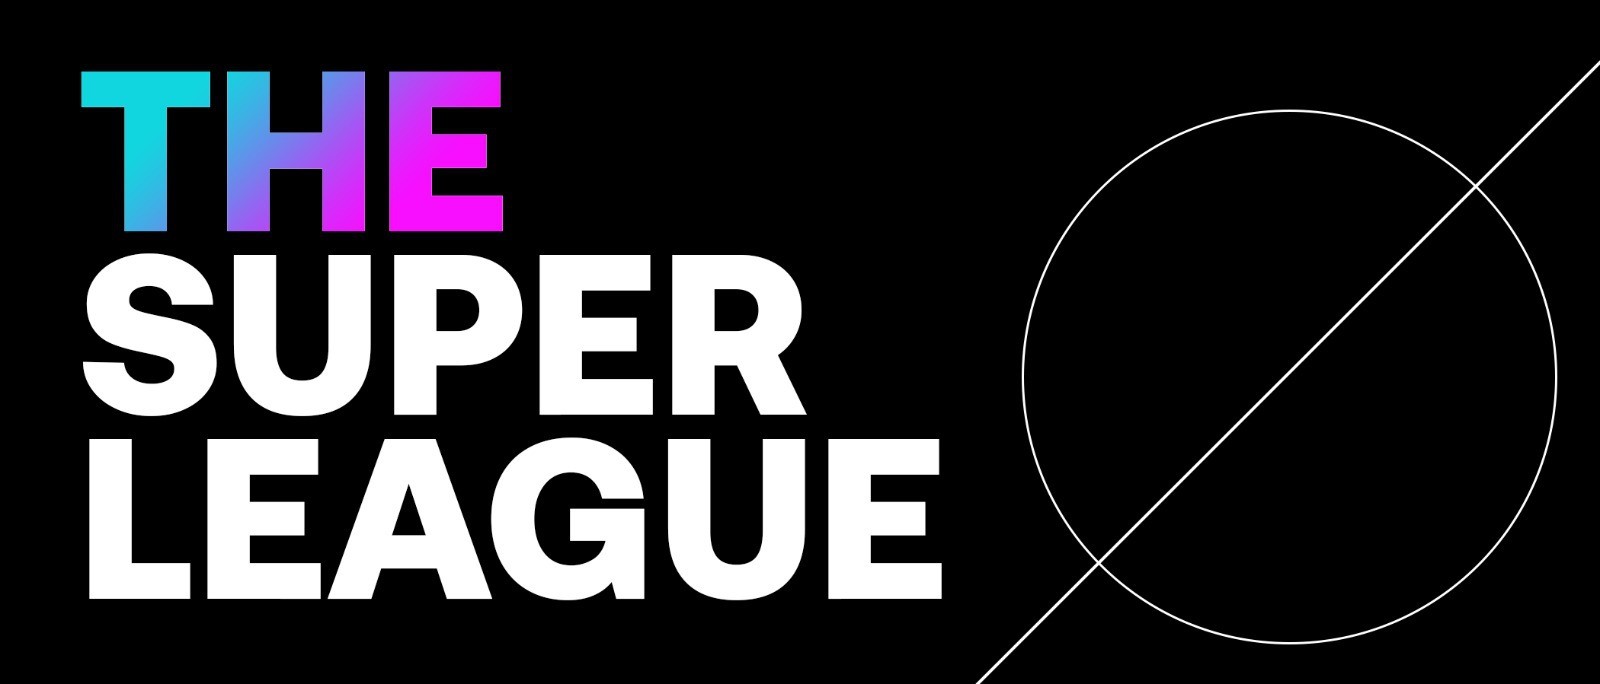 The creation of “The Super League”